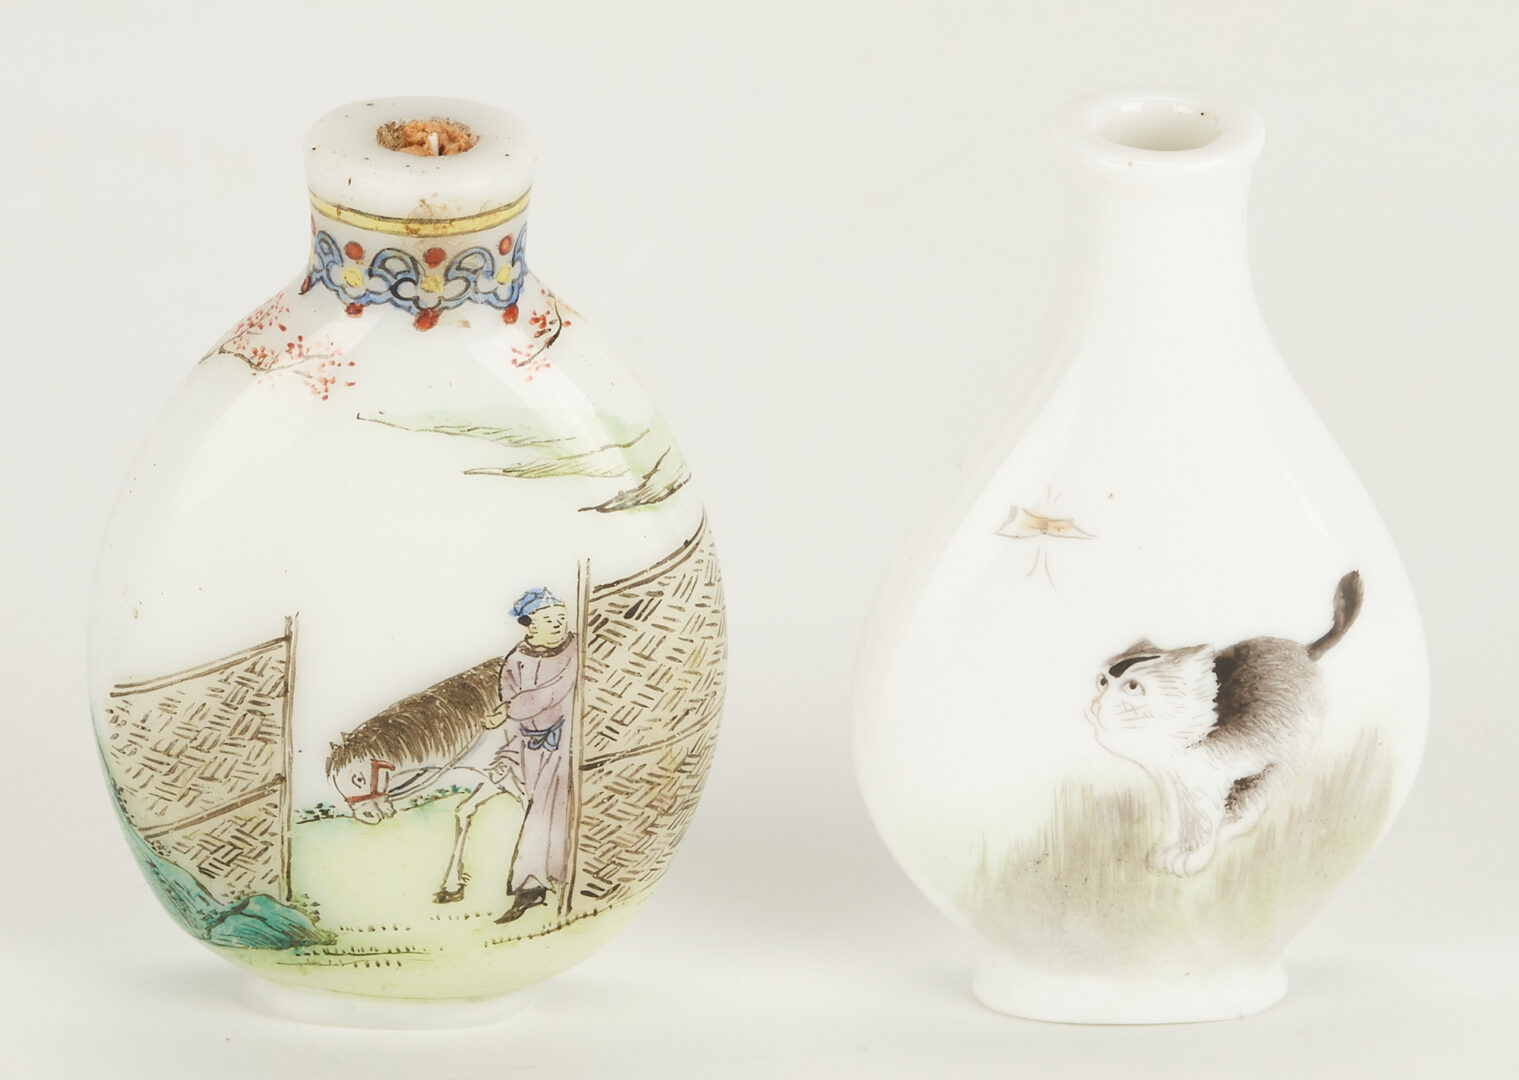 Lot 26: 4 Snuff Bottles Incl. Rooster, Cat, and Chinese Famille Verte Decoration